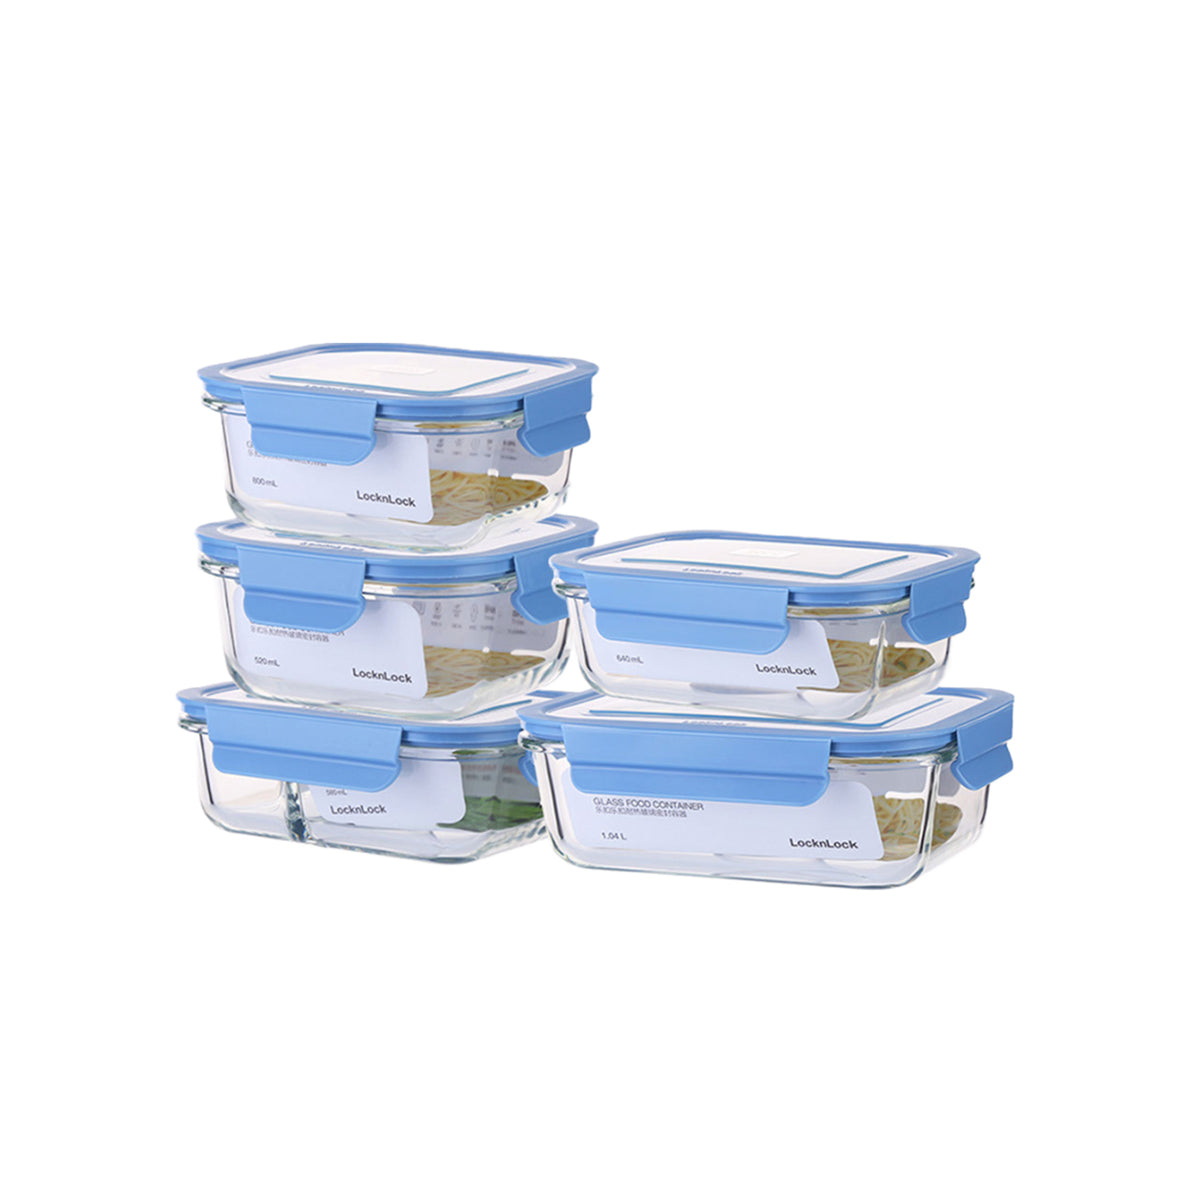 Classic 5pcs Microwave Oven Safe Blue Glass Container Set 3.58L - Your Trusted Food Storage Solution